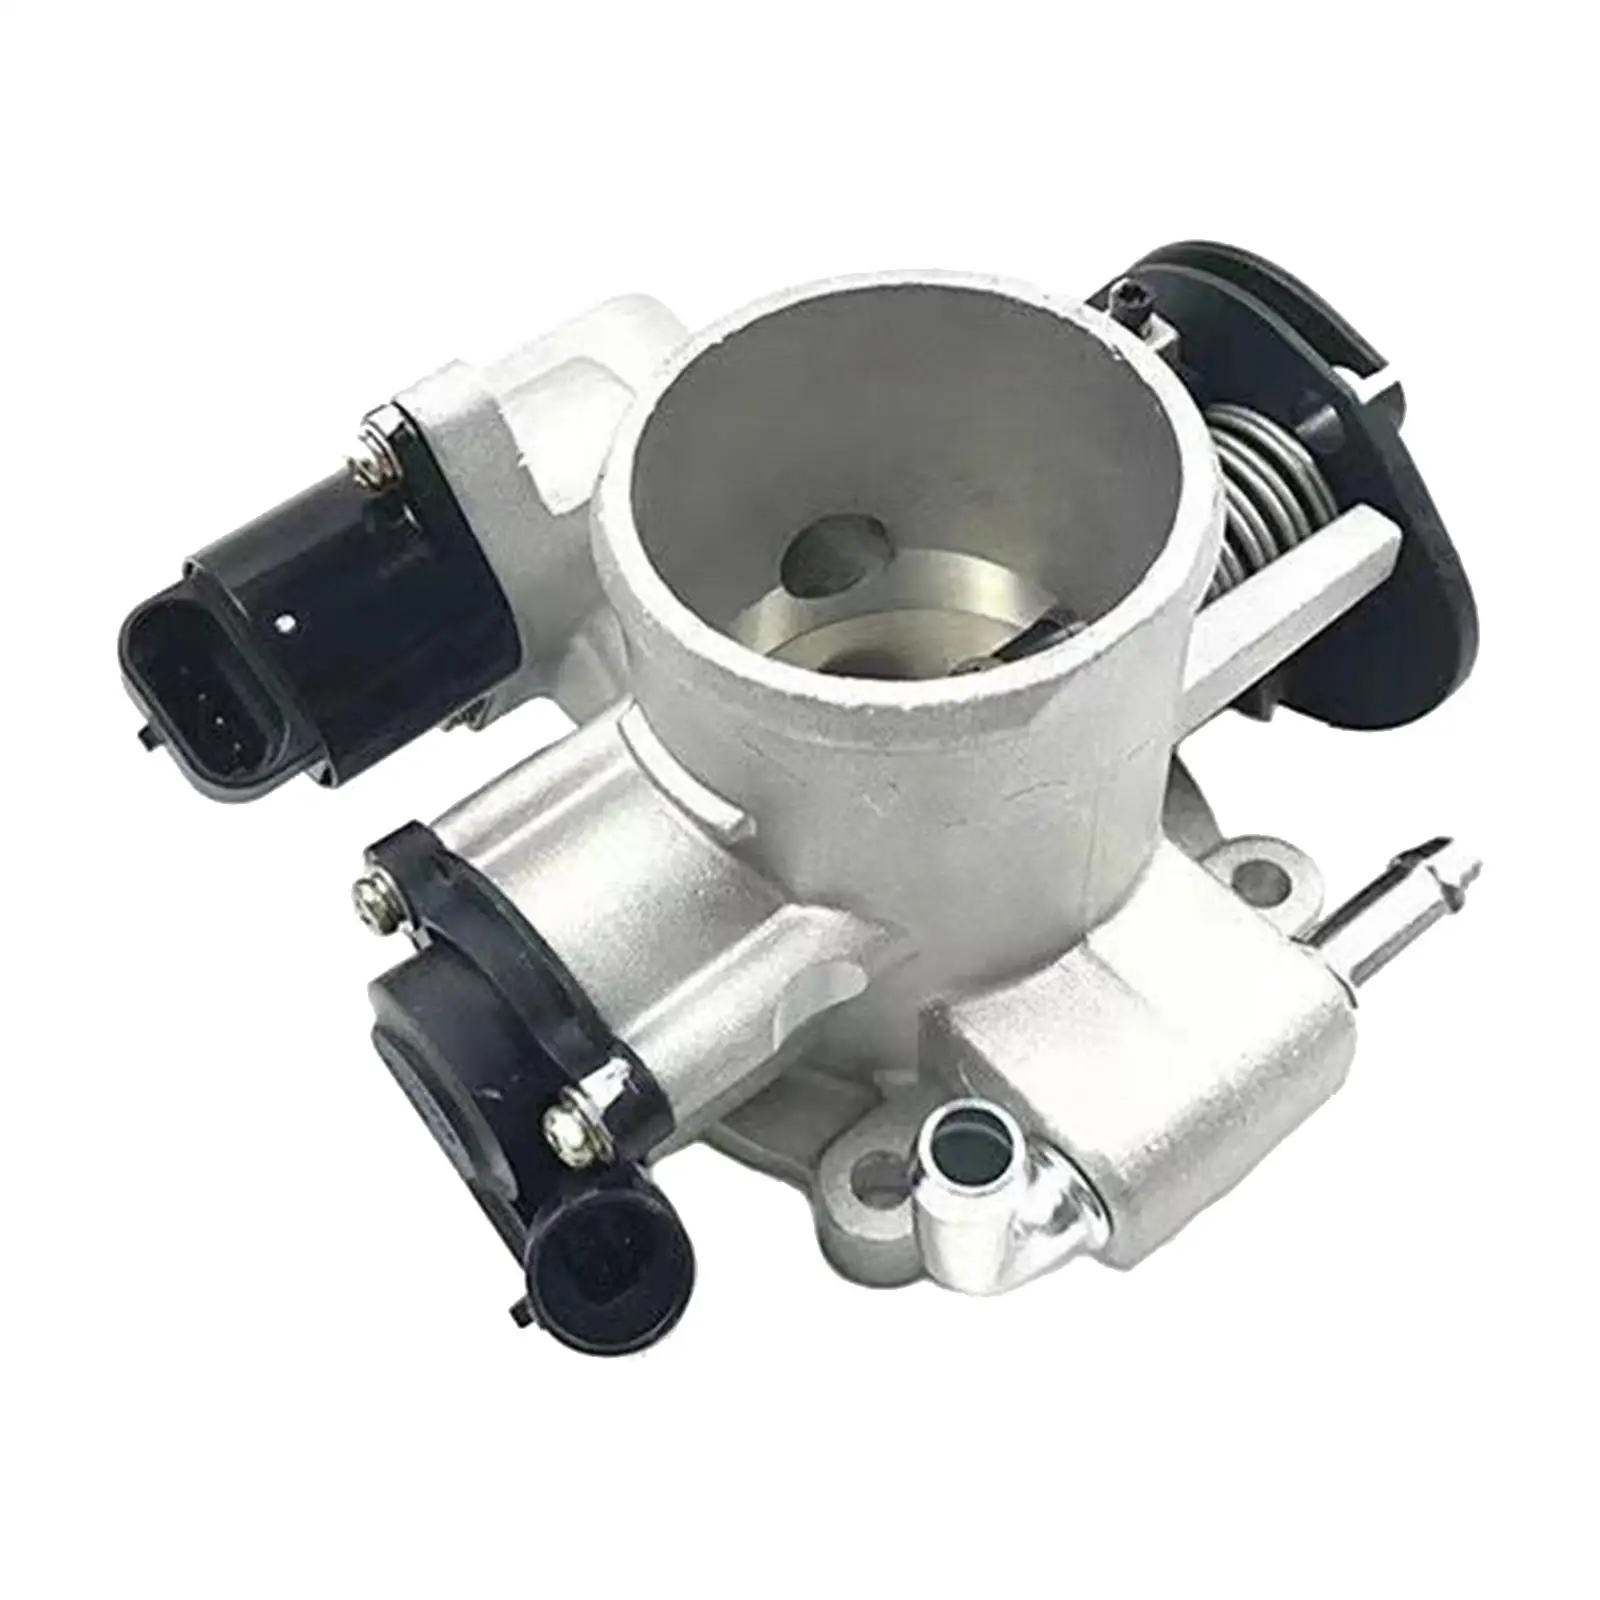 Throttle Body Assembly 96378856 for Buick Excelle 1.6 Convenient Installation Replacement Vehicle Repair Parts Professional